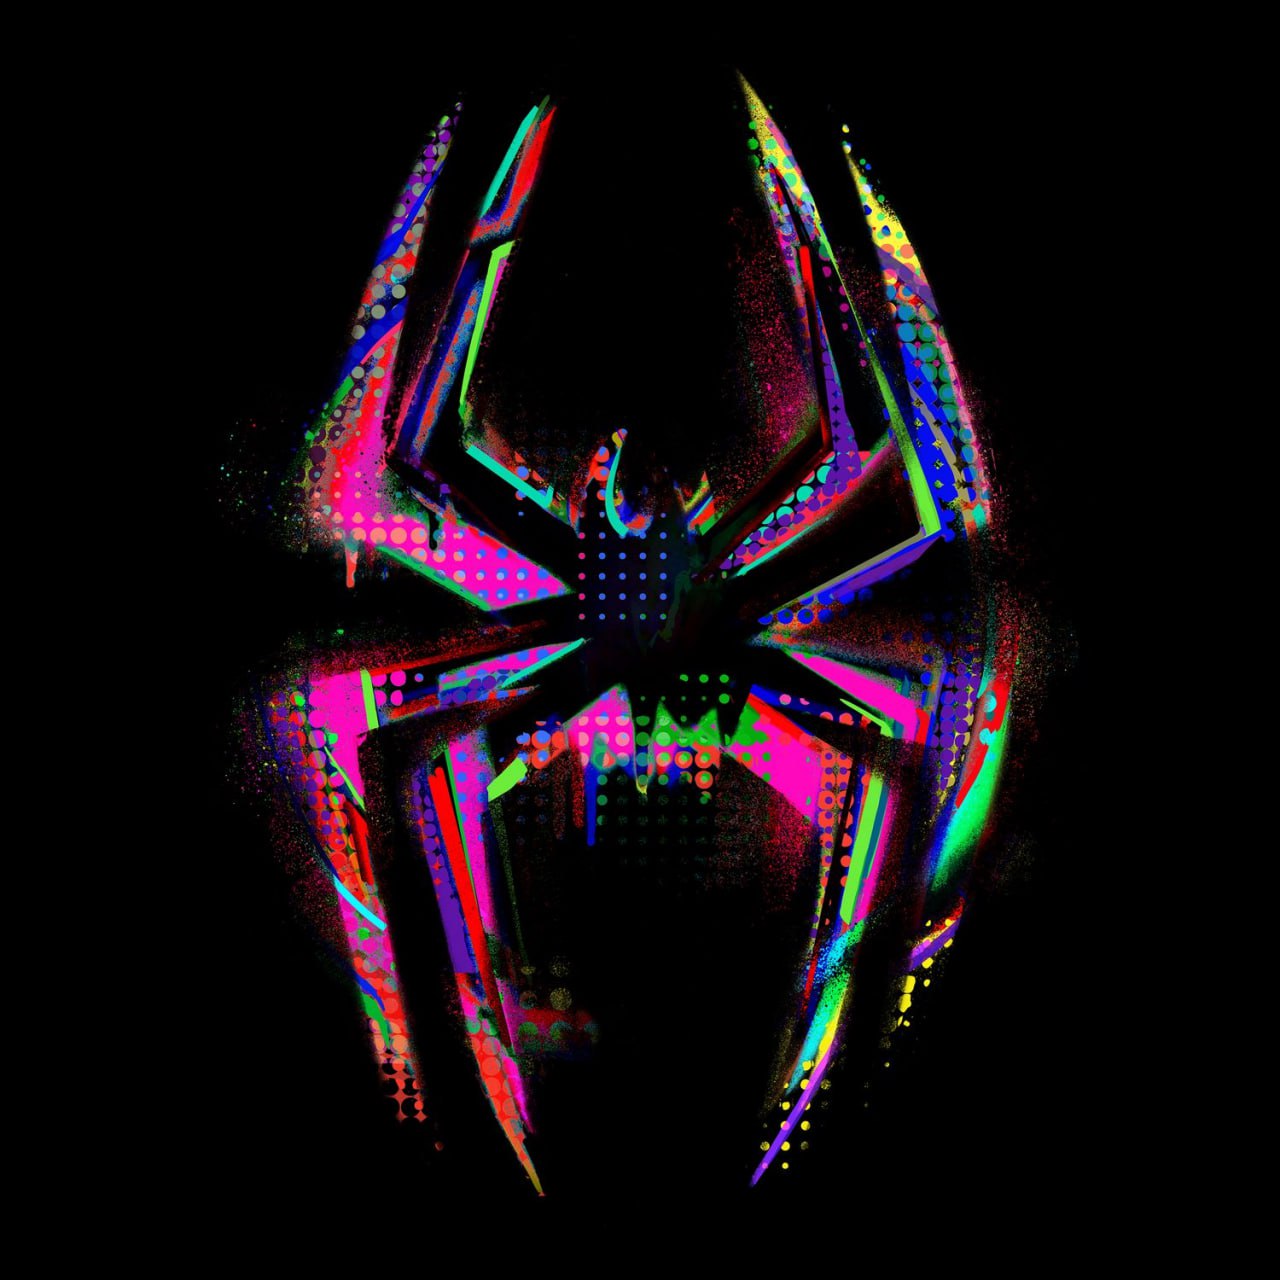 All The Way Live (Spider-Man Across the Spider-Verse) Metro Boomin ft. Future & Lil Uzi Vert